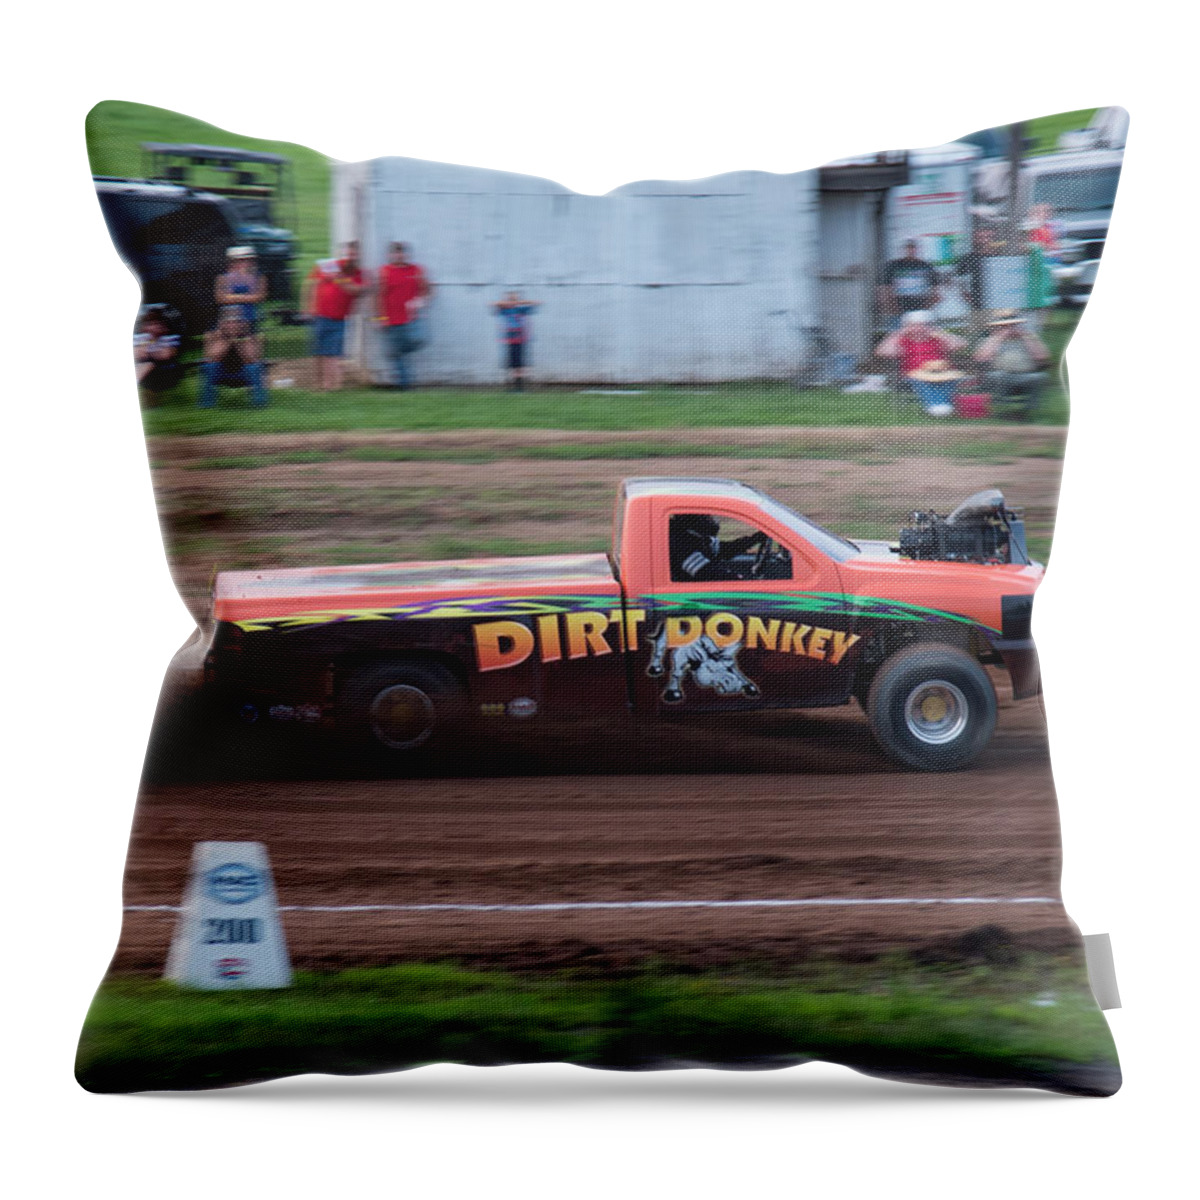 Dirt Donkey Throw Pillow featuring the photograph Dirt Donkey by Holden The Moment